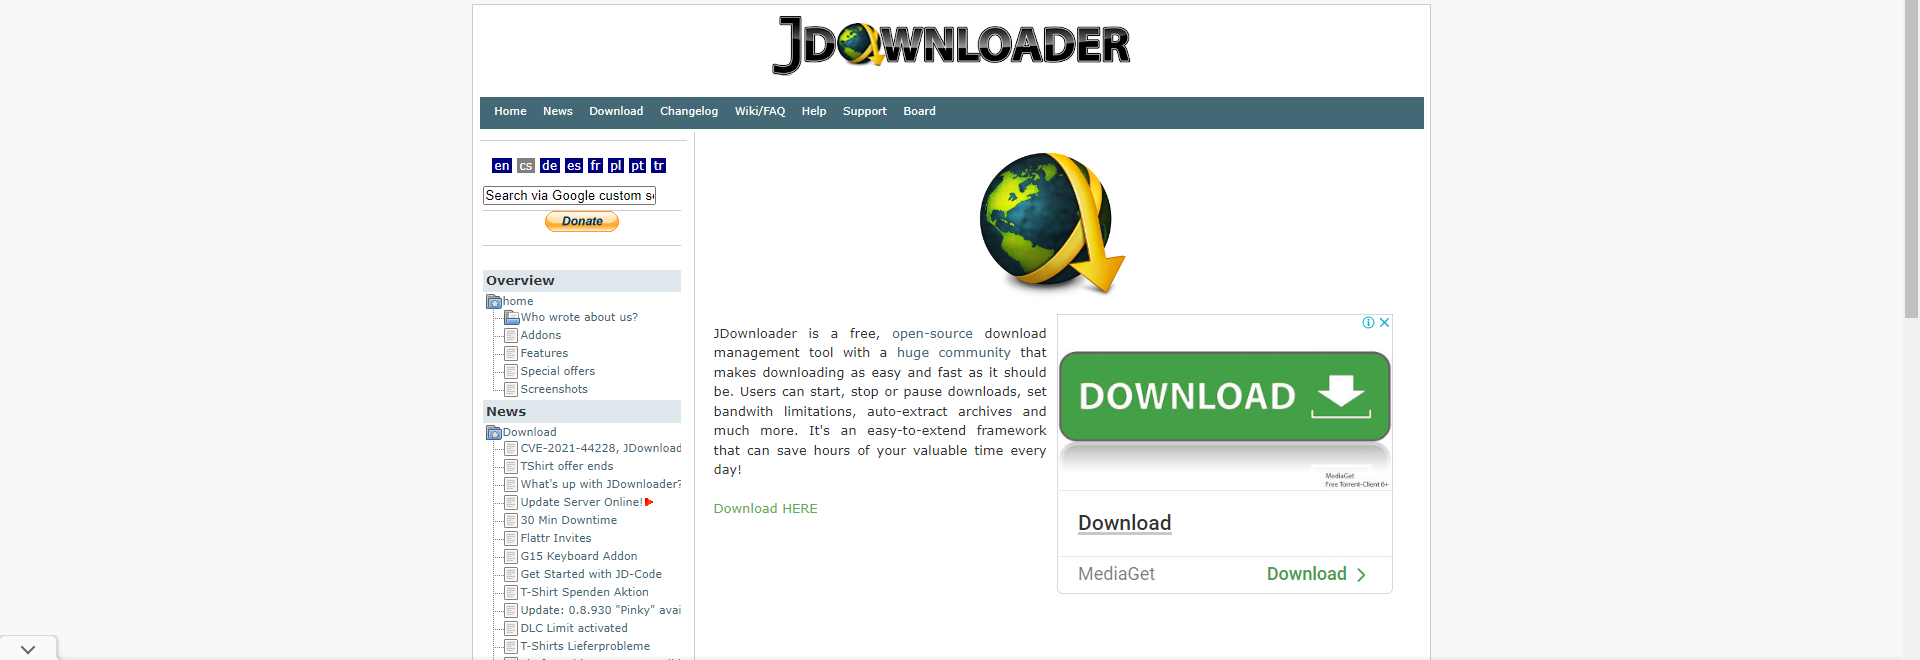 Download Anything On The Internet with JDownloader